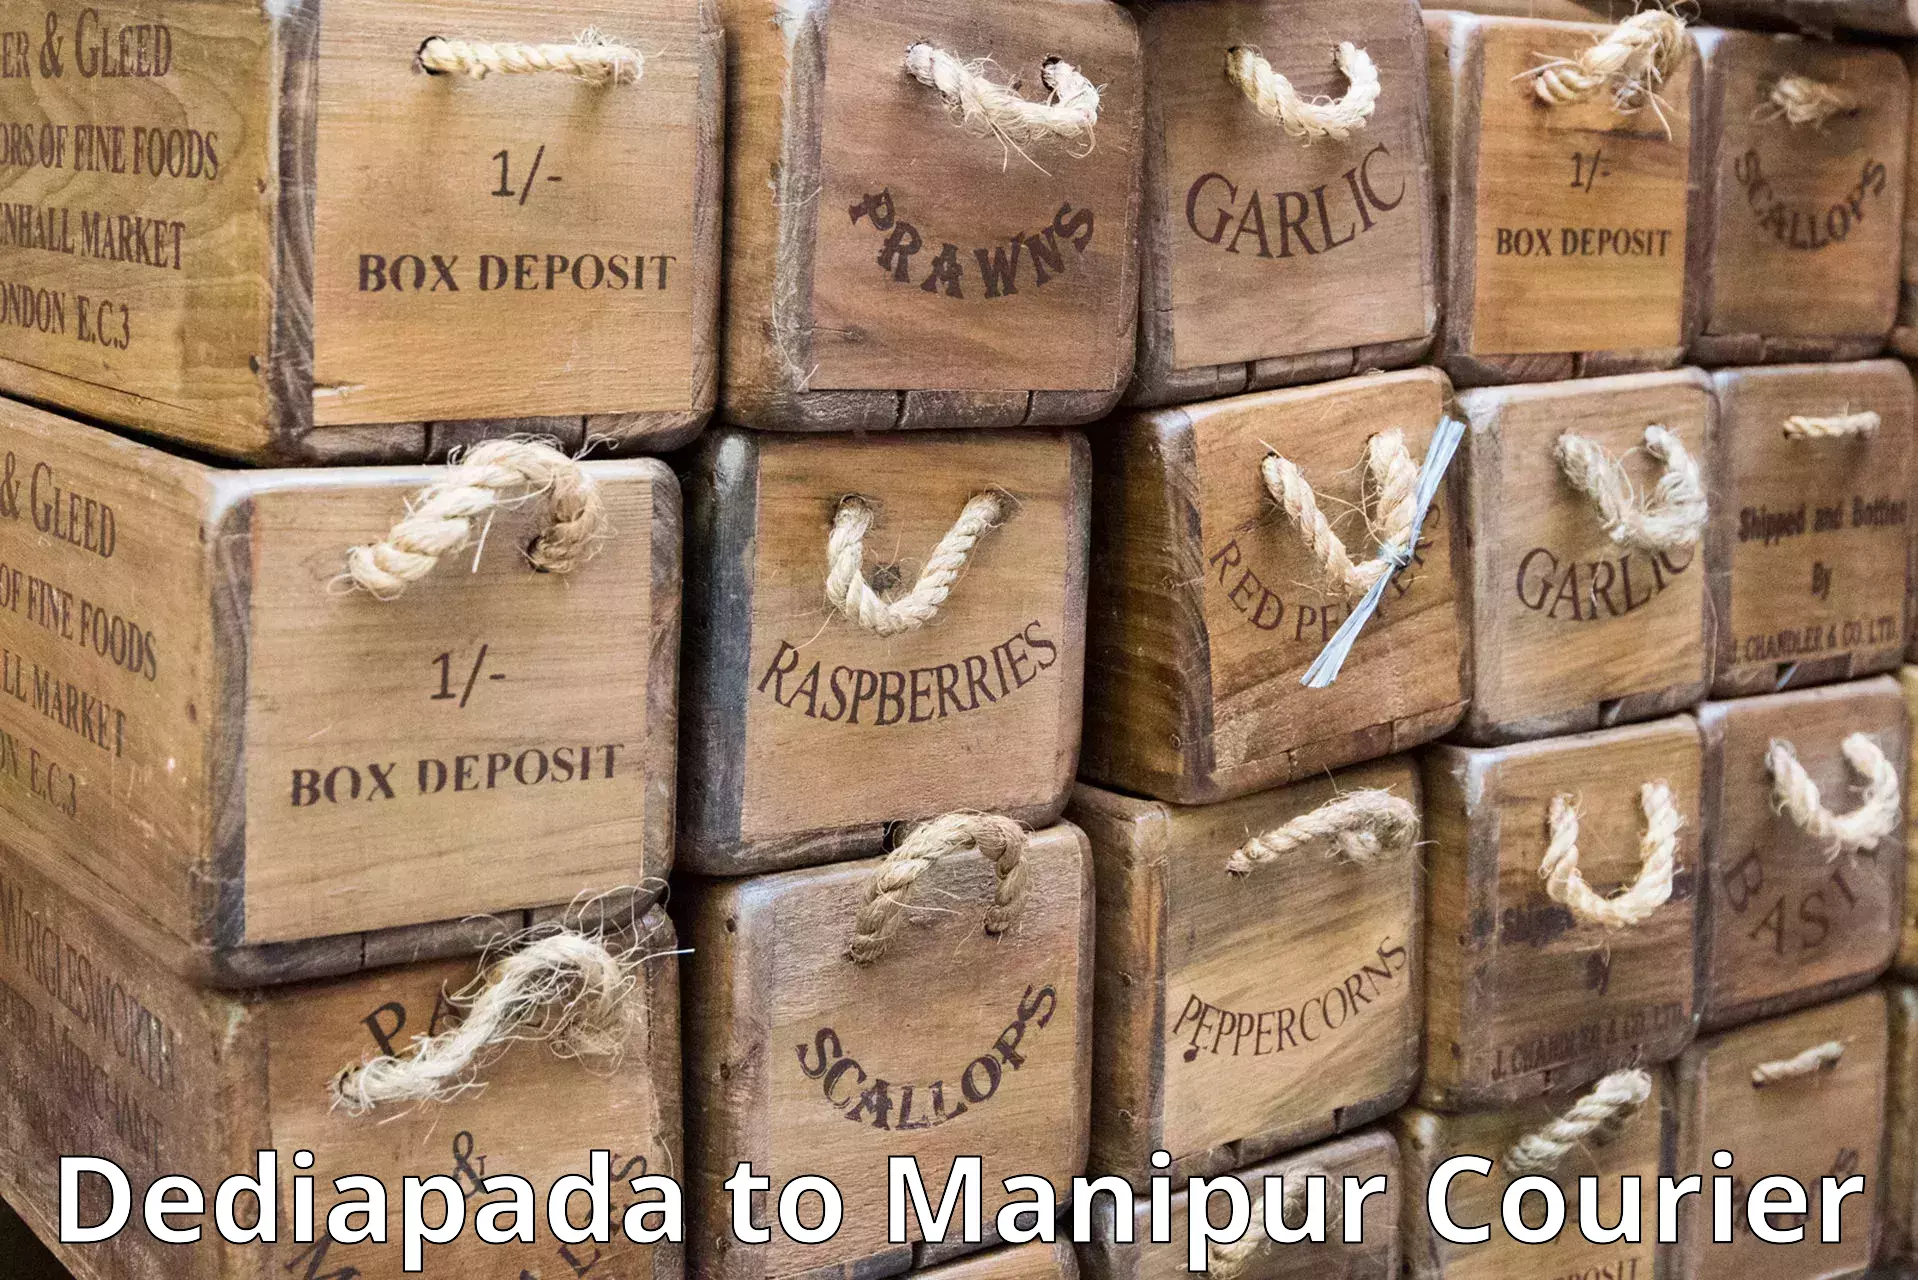 User-friendly delivery service Dediapada to Manipur